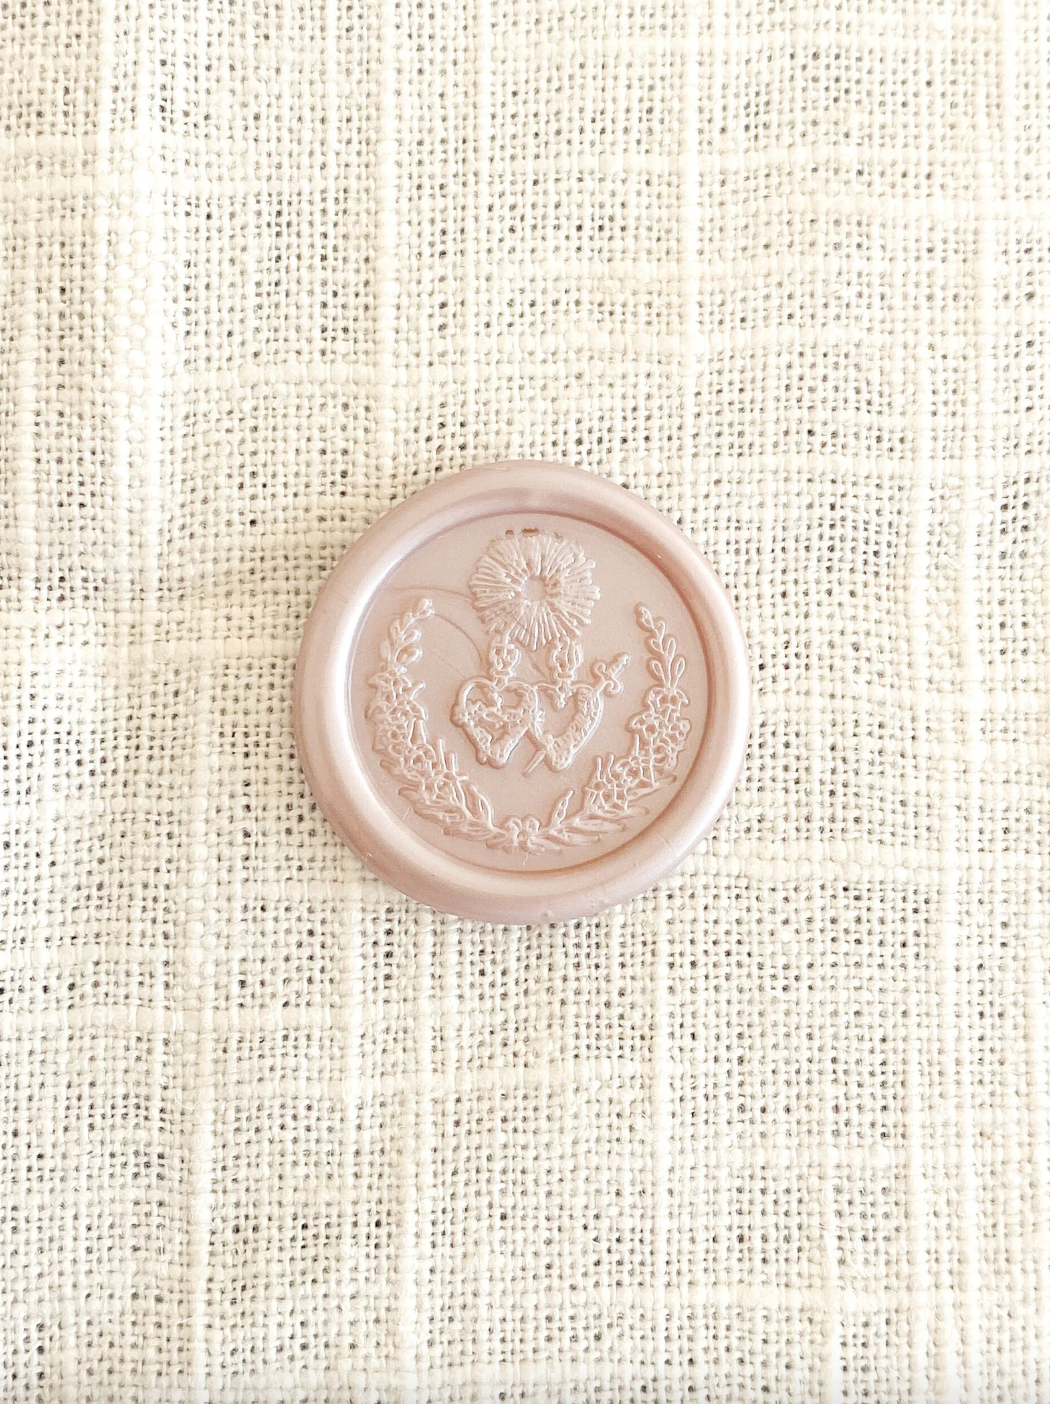 Catholic Wax Seals, Sacred Heart of Jesus, Immaculate Heart of Mary - 10 pack